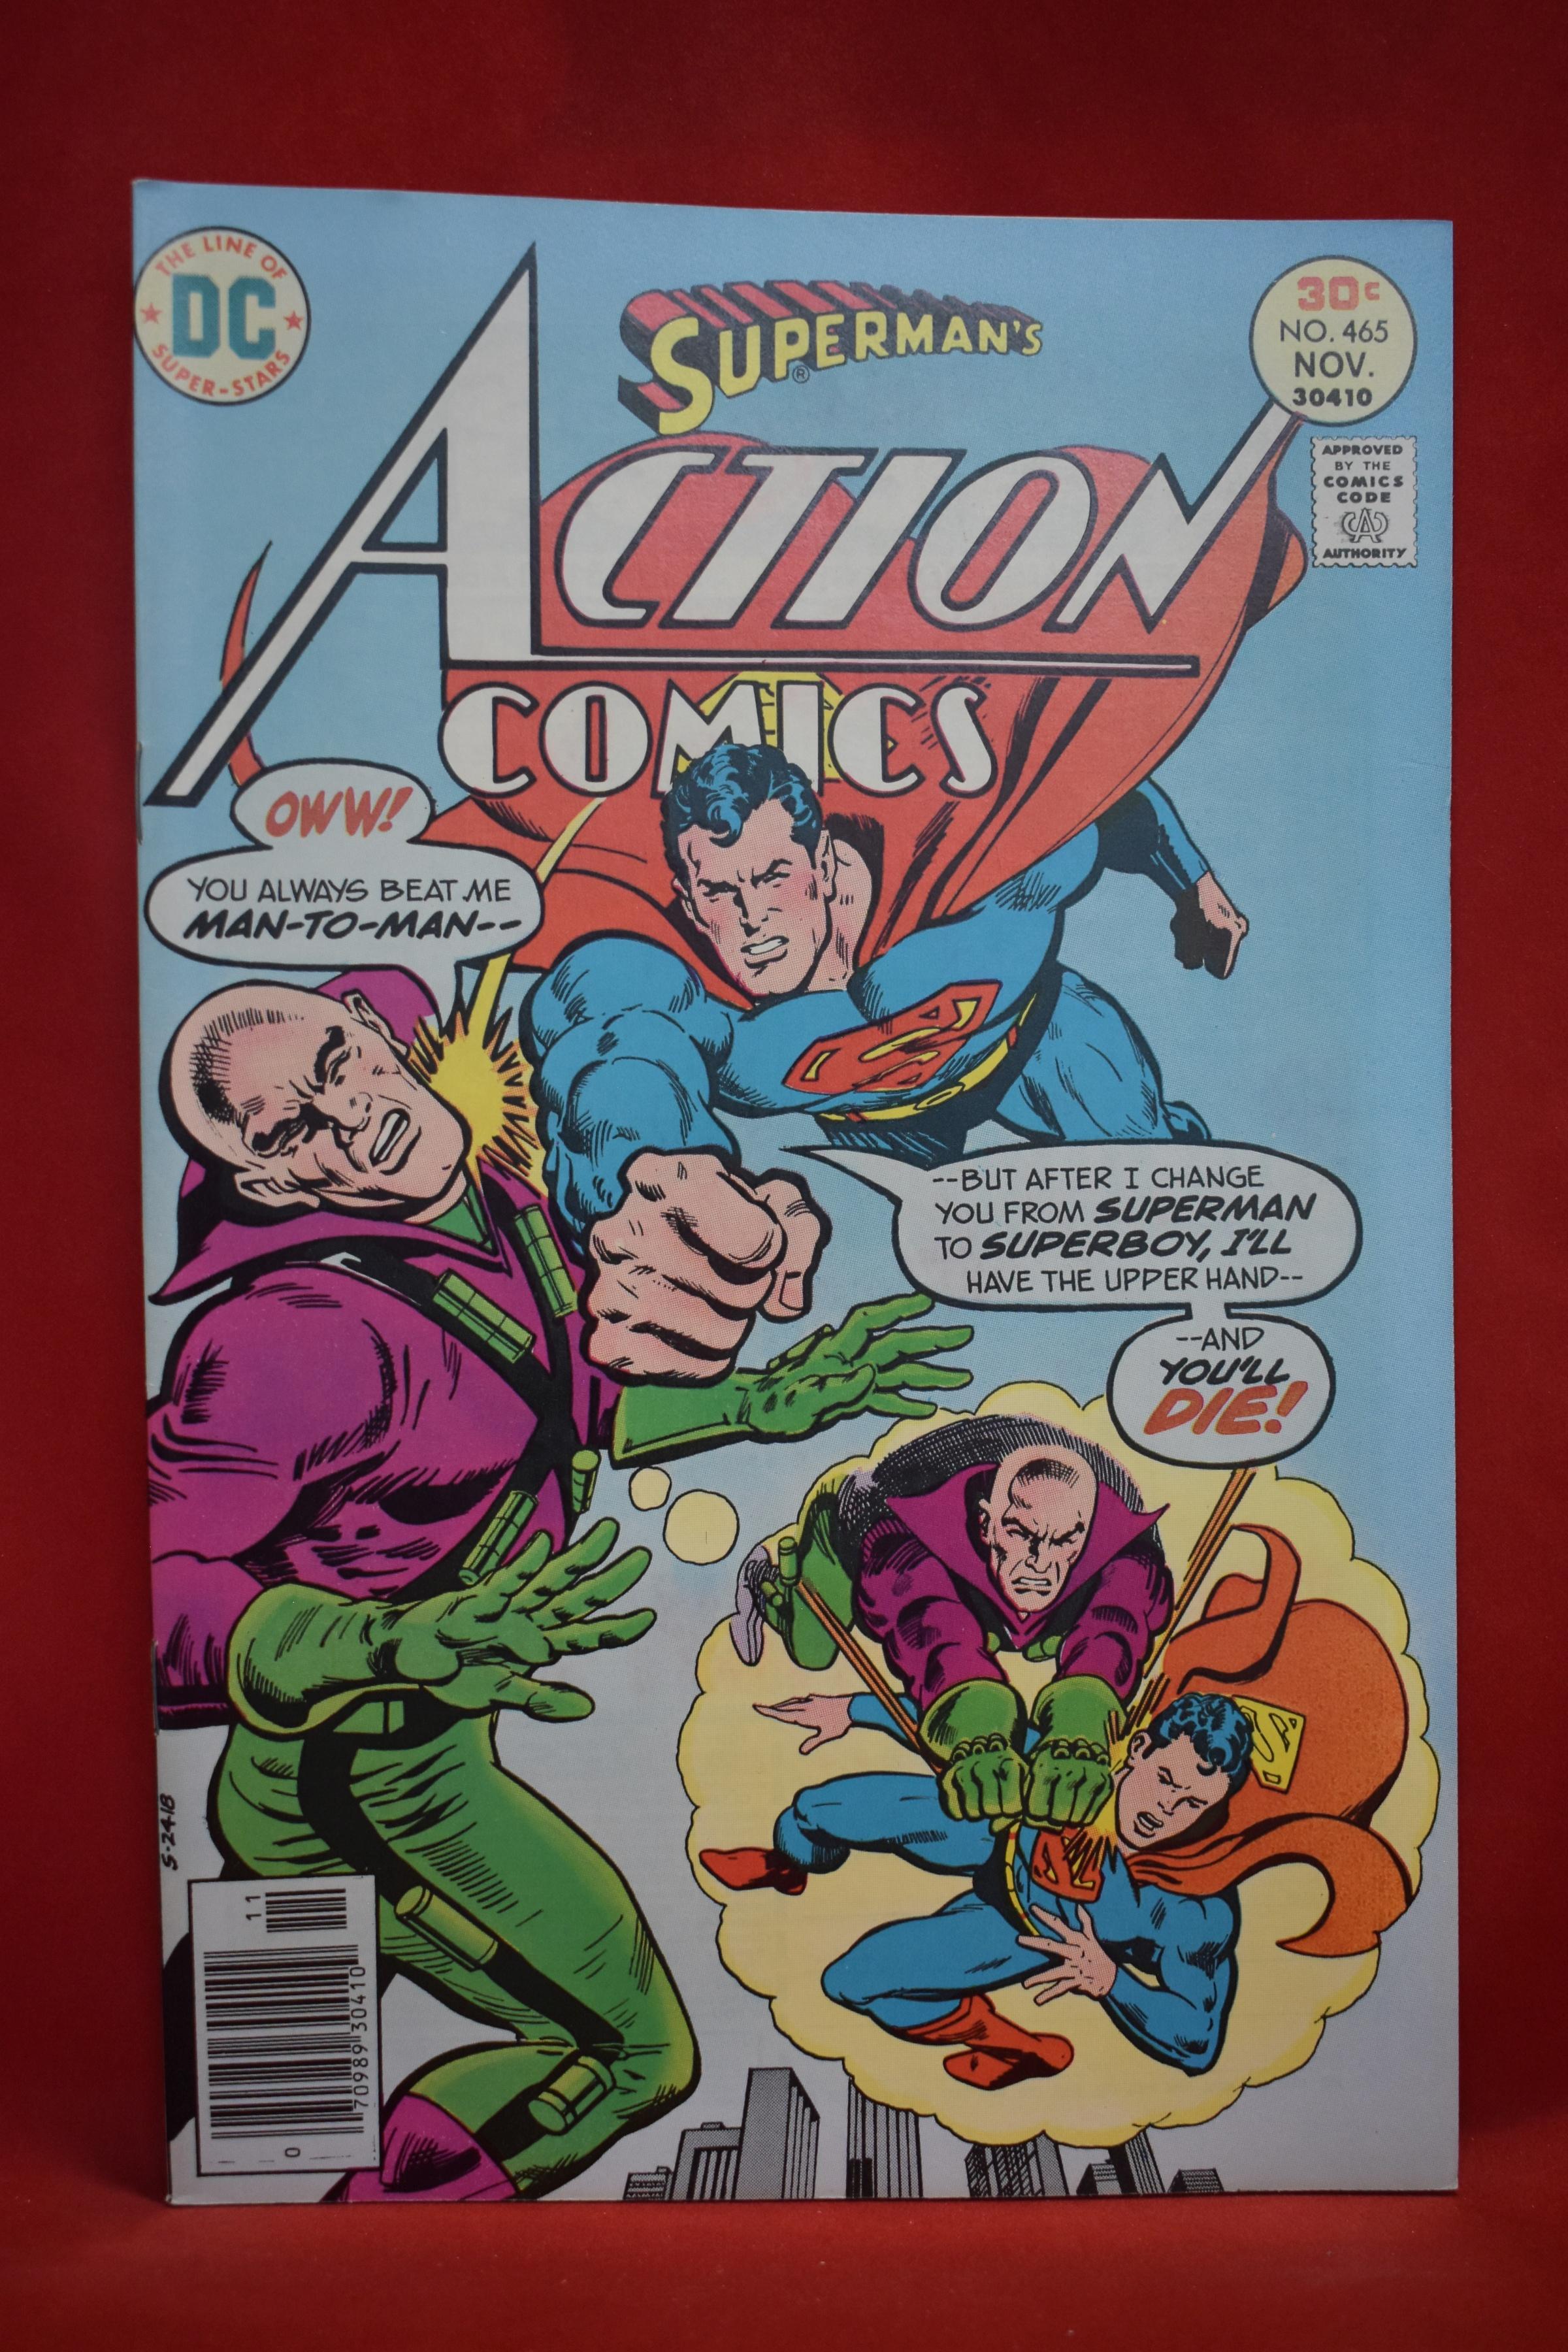 ACTION COMICS #465 | LEX LUTHOR - THINK YOUNG AND DIE | BOB OKSNER - 1976